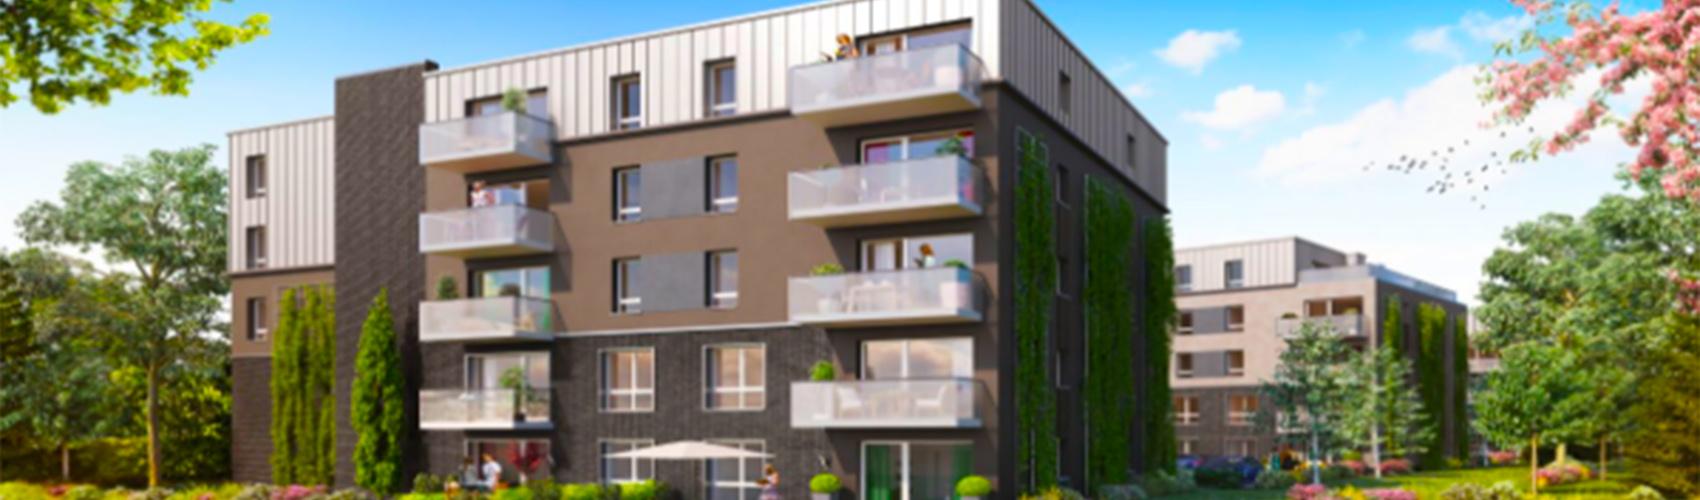 Programme immobilier neuf 59170 Croix CRX-1395